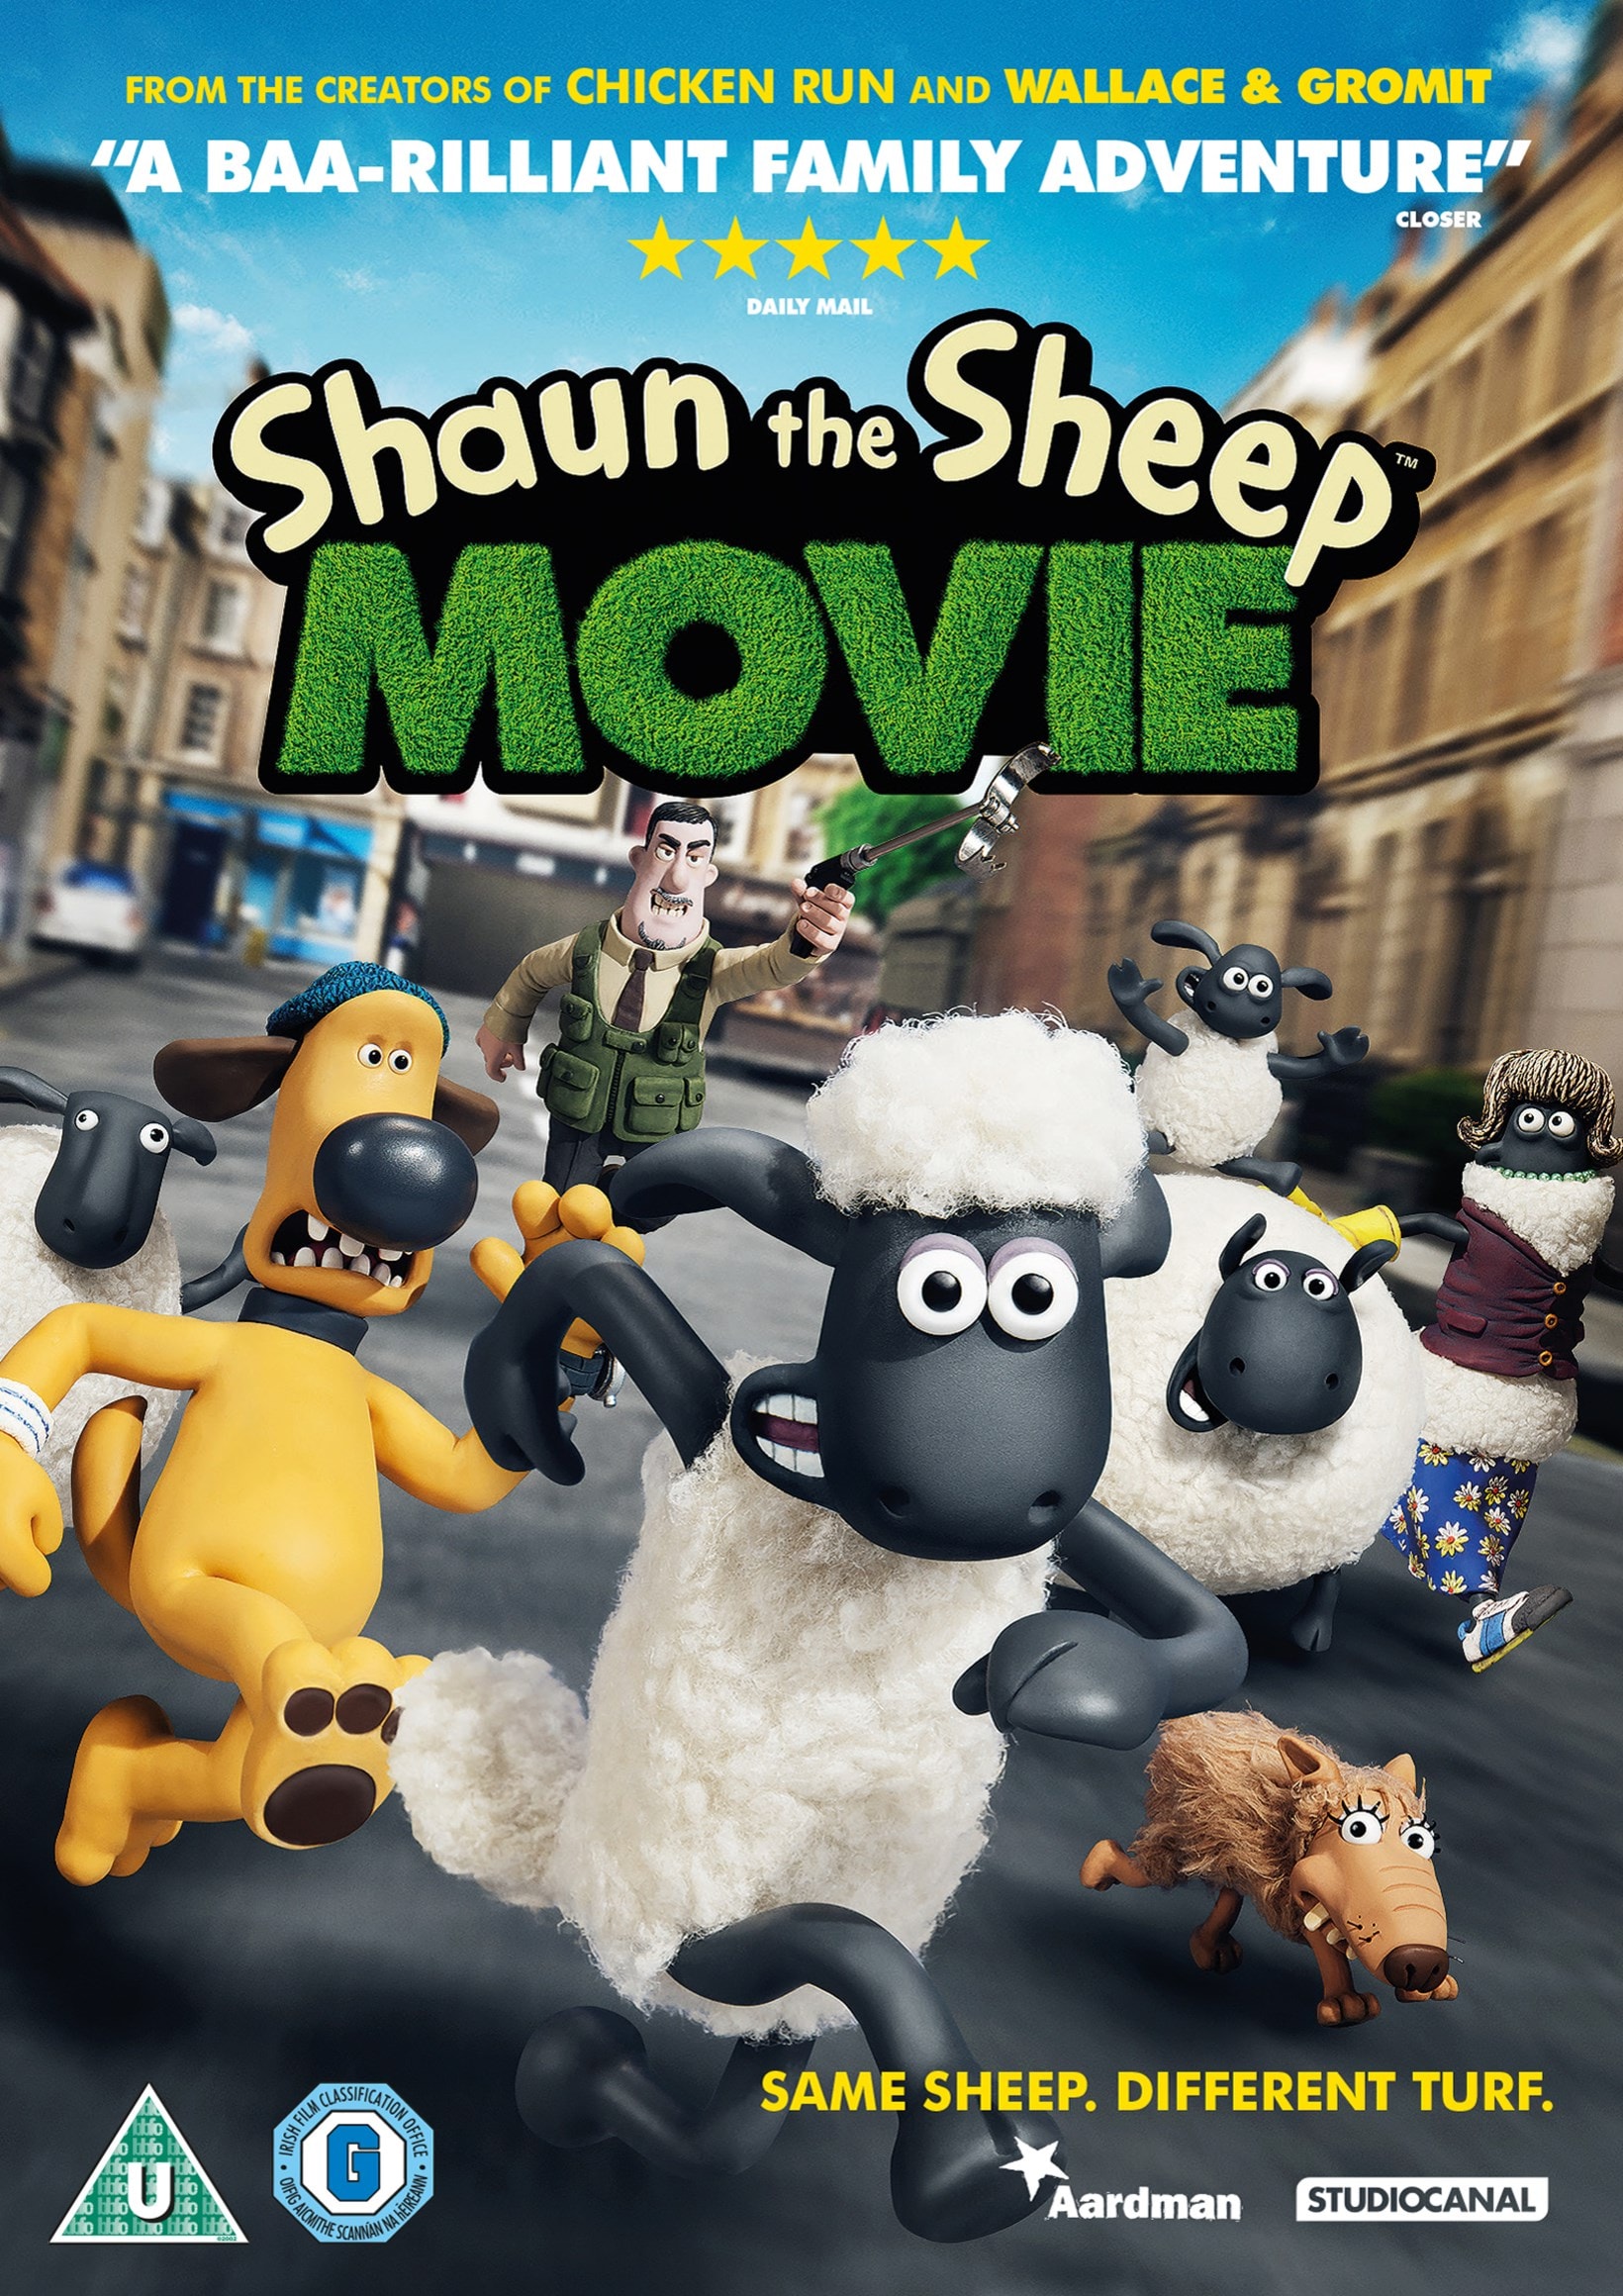 Watch the charming first trailer for Shaun The Sheep movie sequel